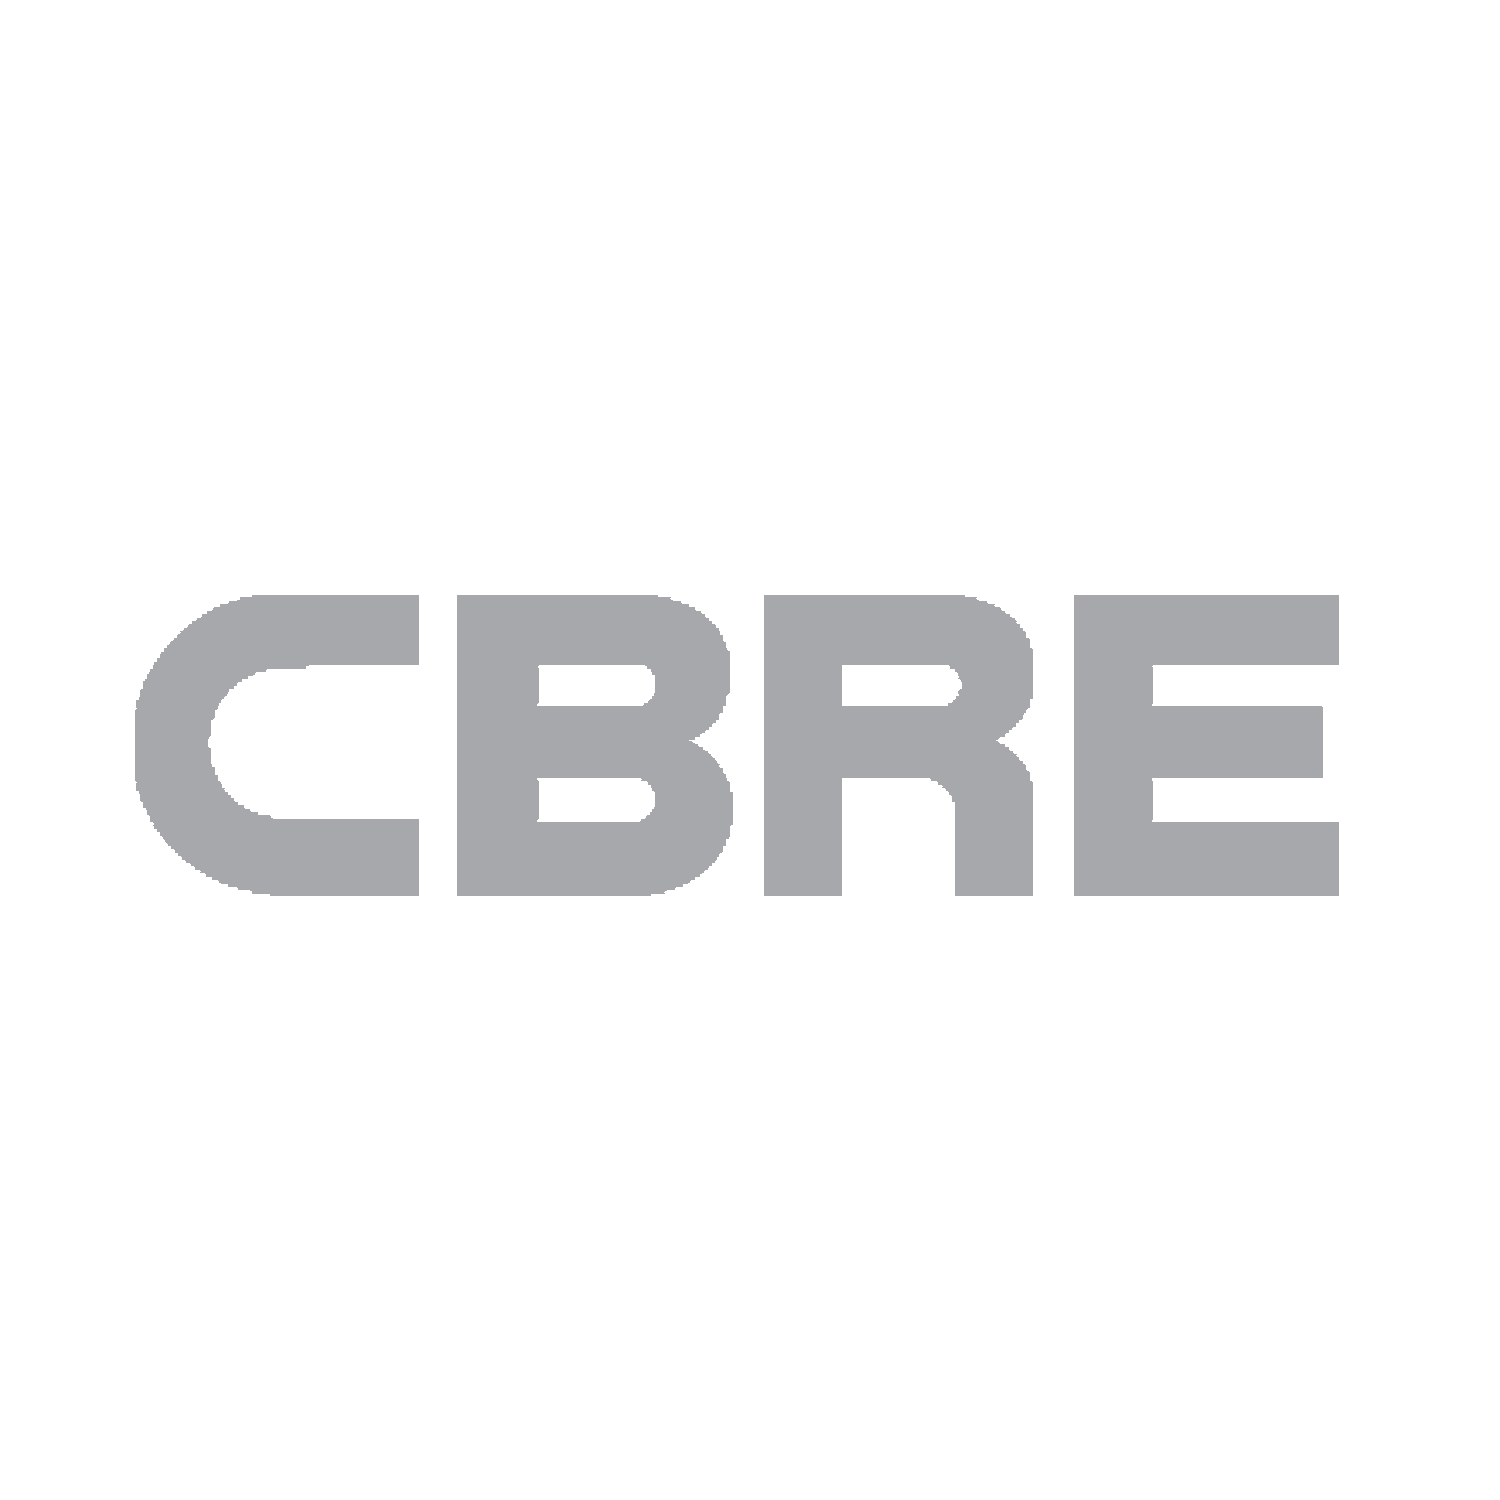 CBRE grey square.png